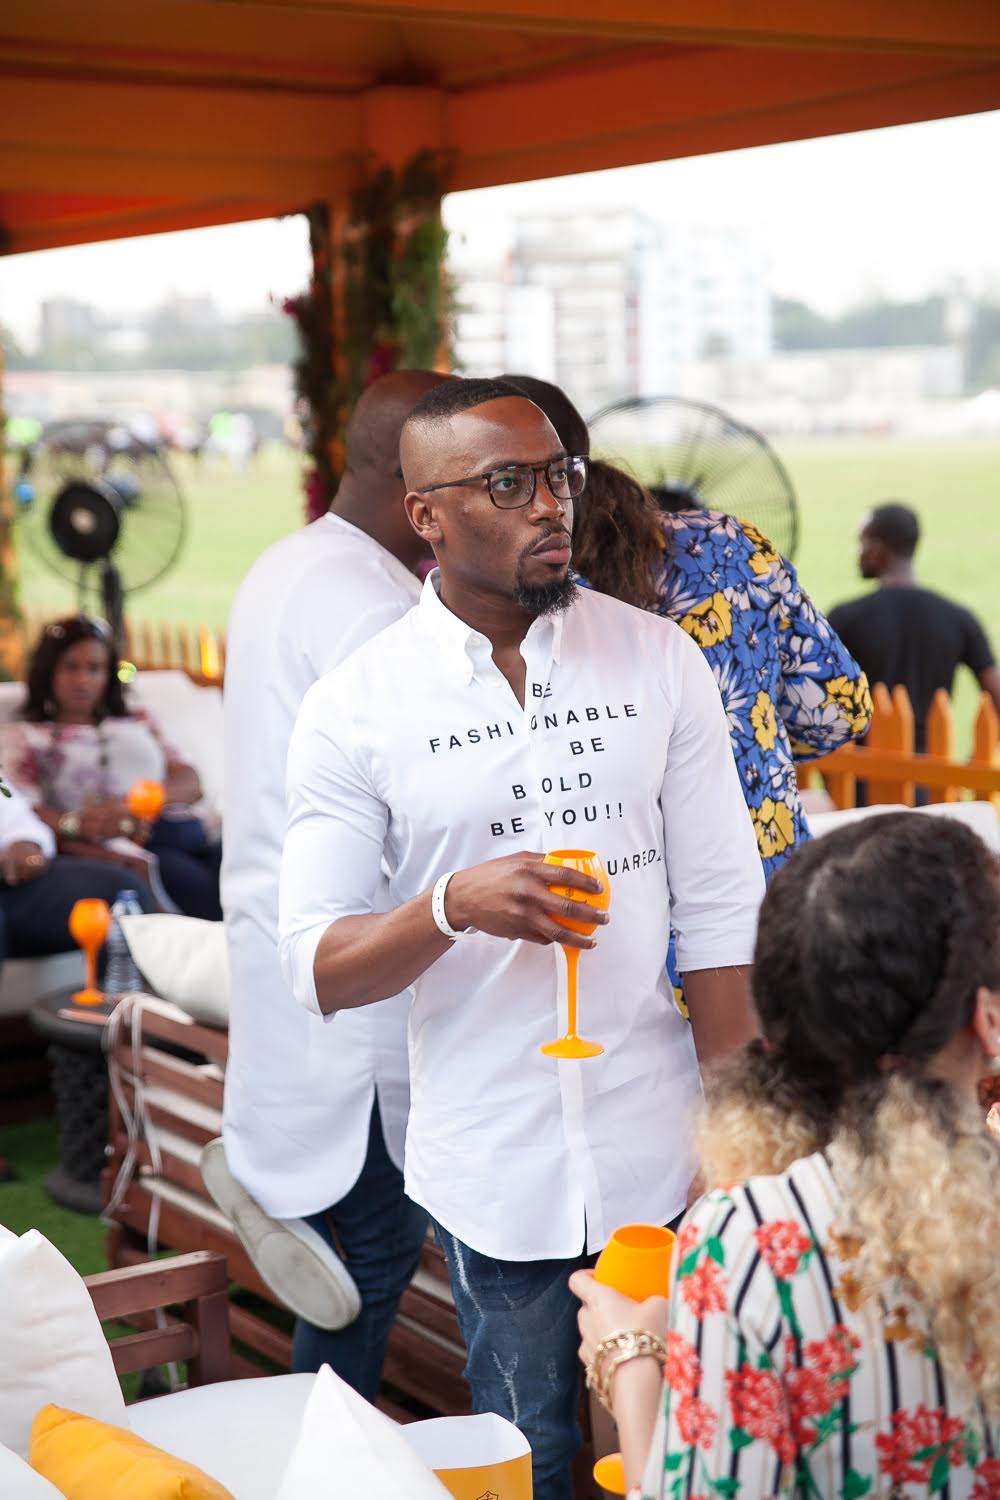 Our Best Looks At The 2019 Veuve Clicquot Polo #Yelloweek Day  3